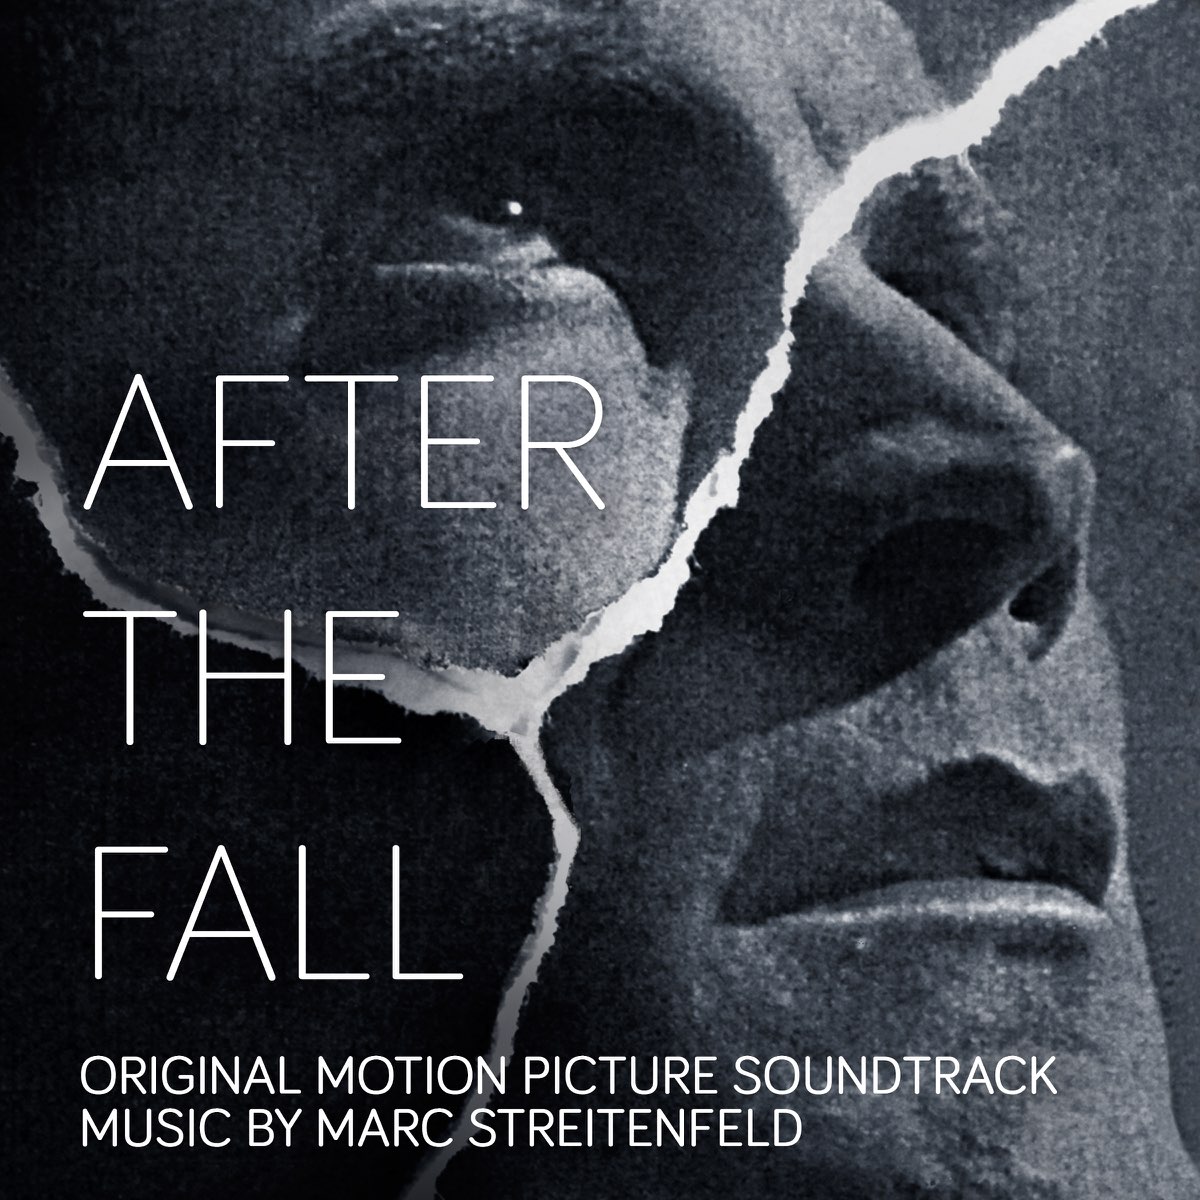 Marc Streitenfeld. Soundtrack the after. Ost fall